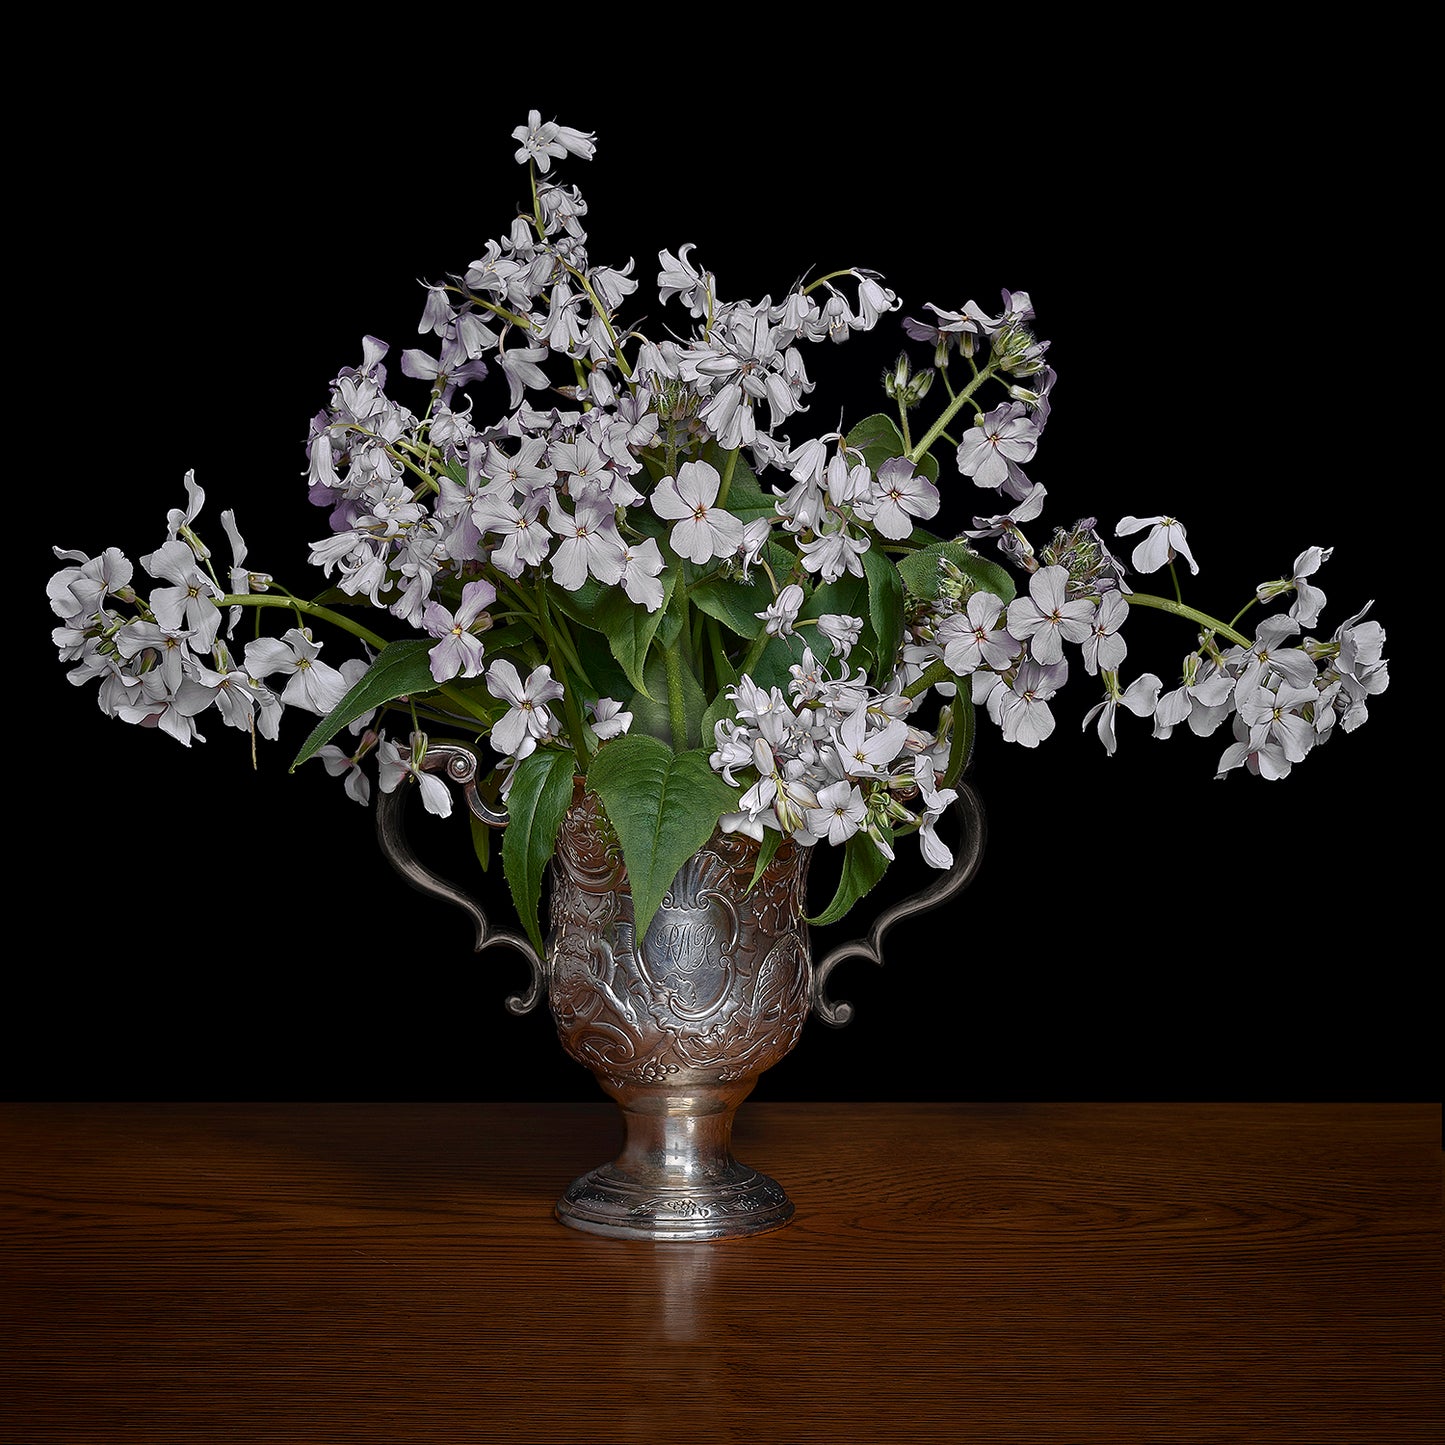 Woodland Scilla and Phlox in a Silver Cup